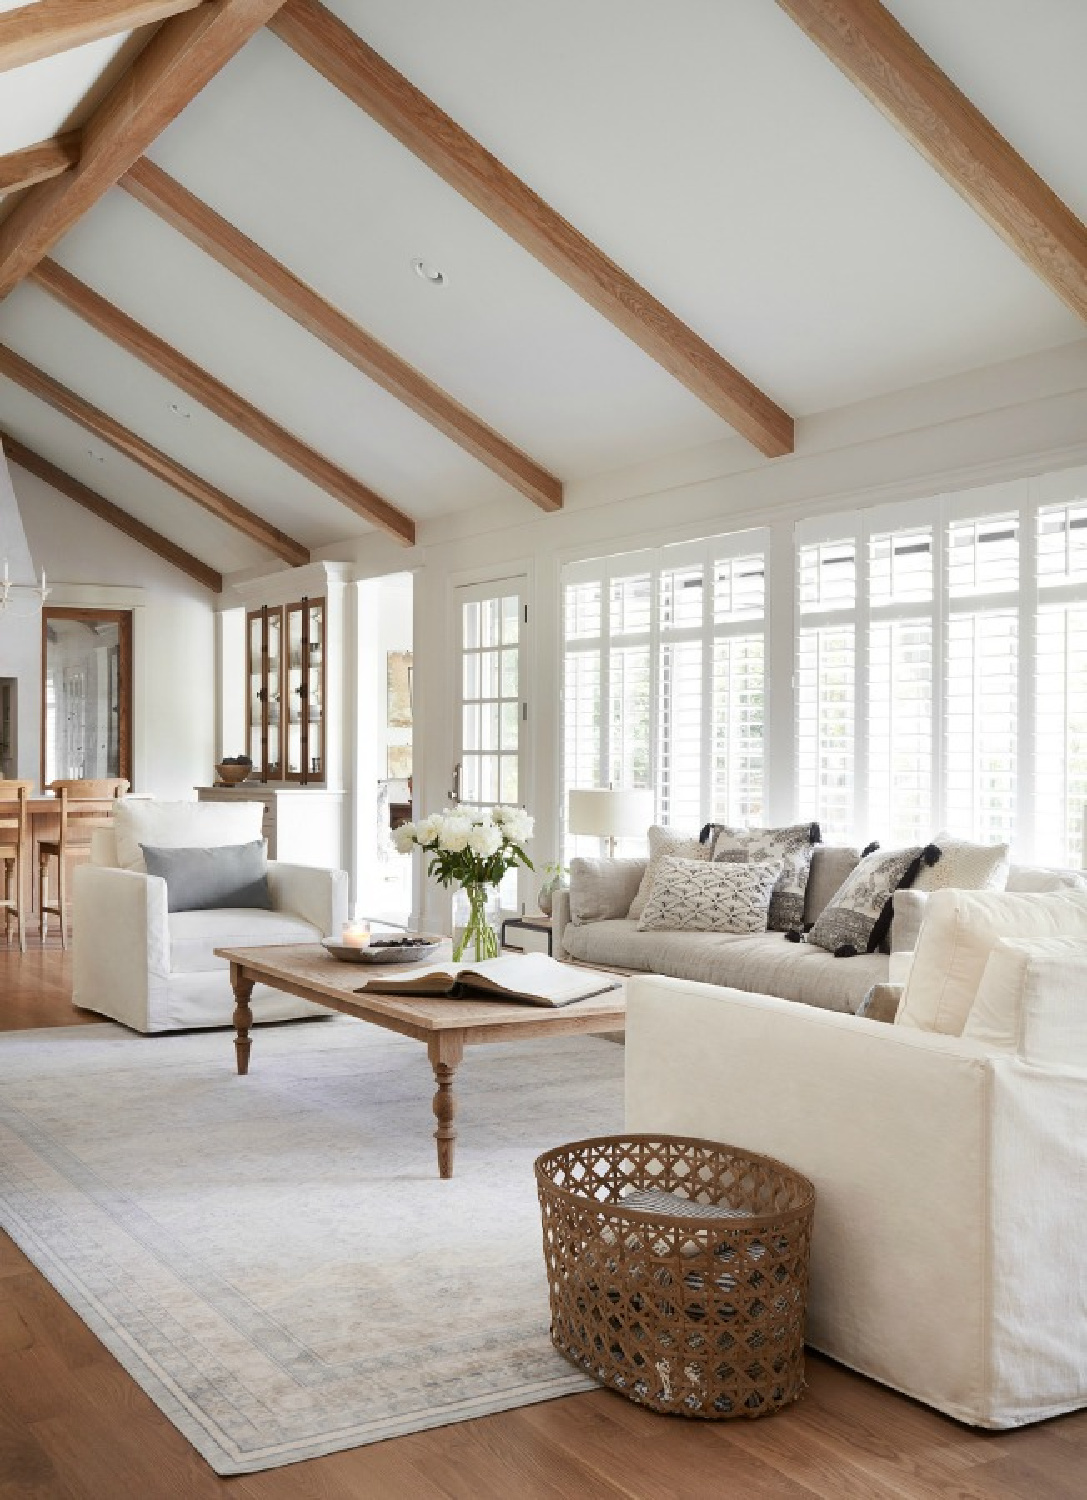 French Country Family Room: Get the Neutral Look Now - Hello Lovely